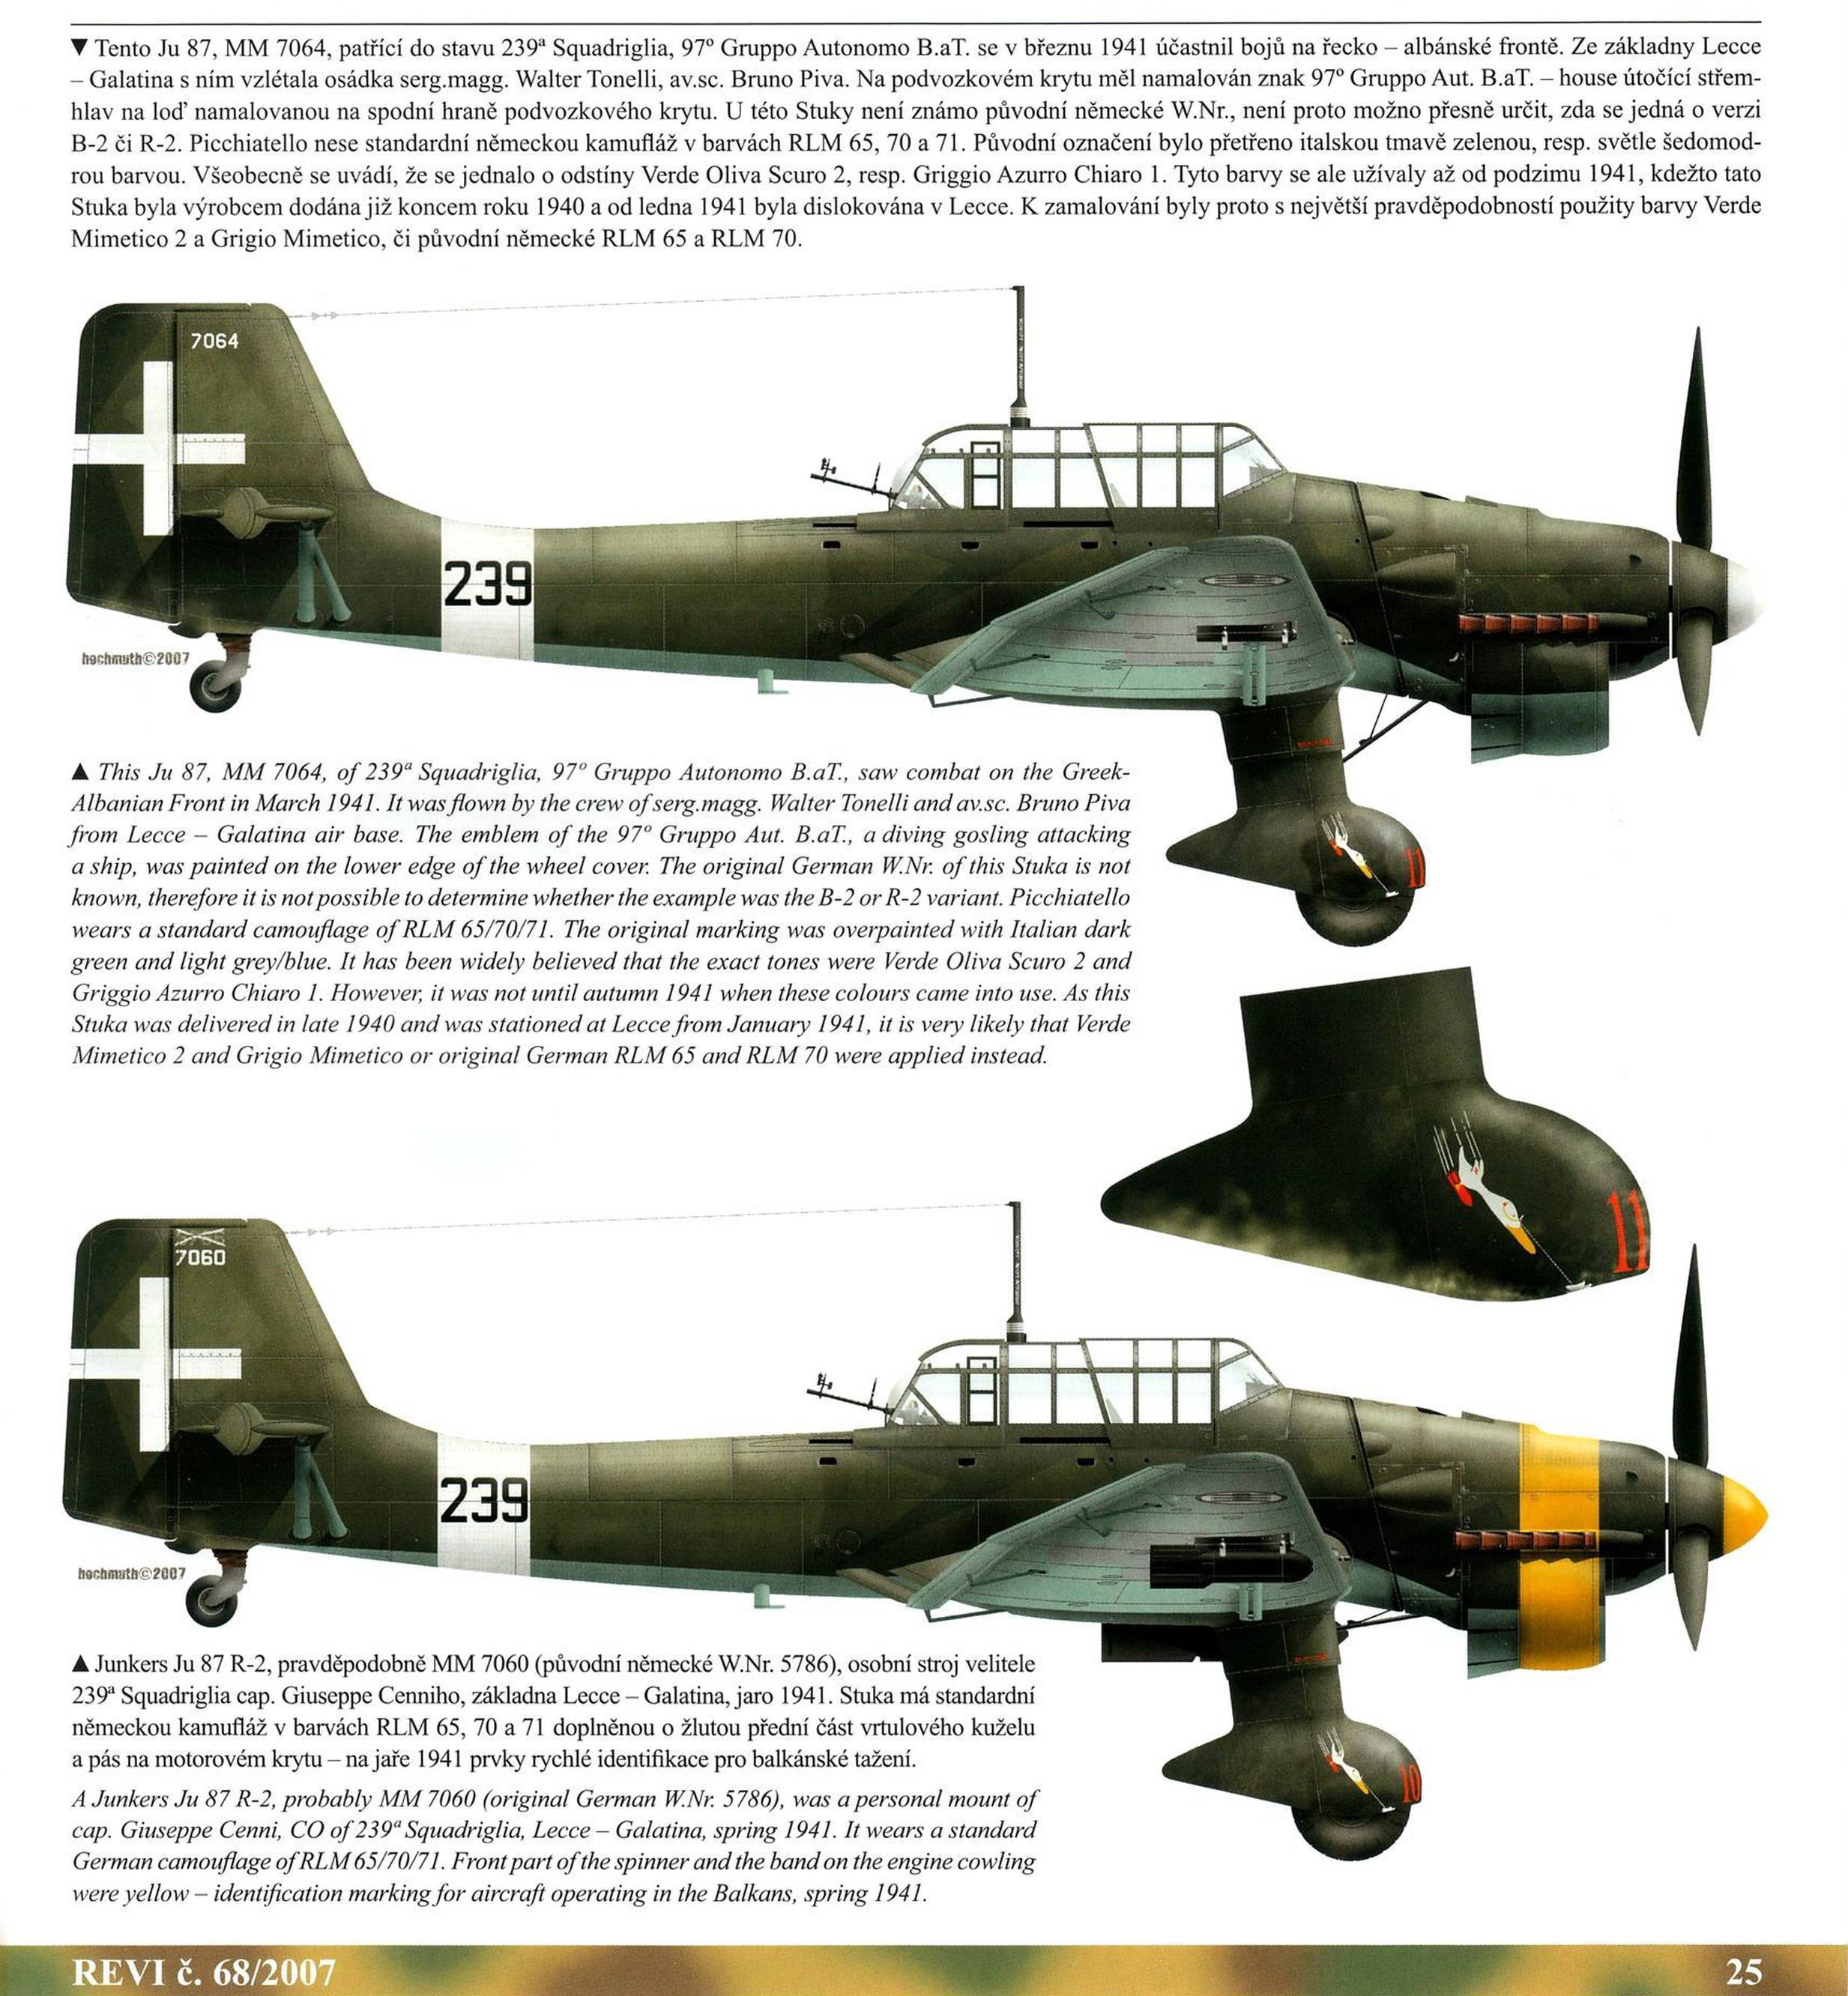 Junkers Ju 87 Picchiatello RA article and profiles by Revi 68 2007 Page 25